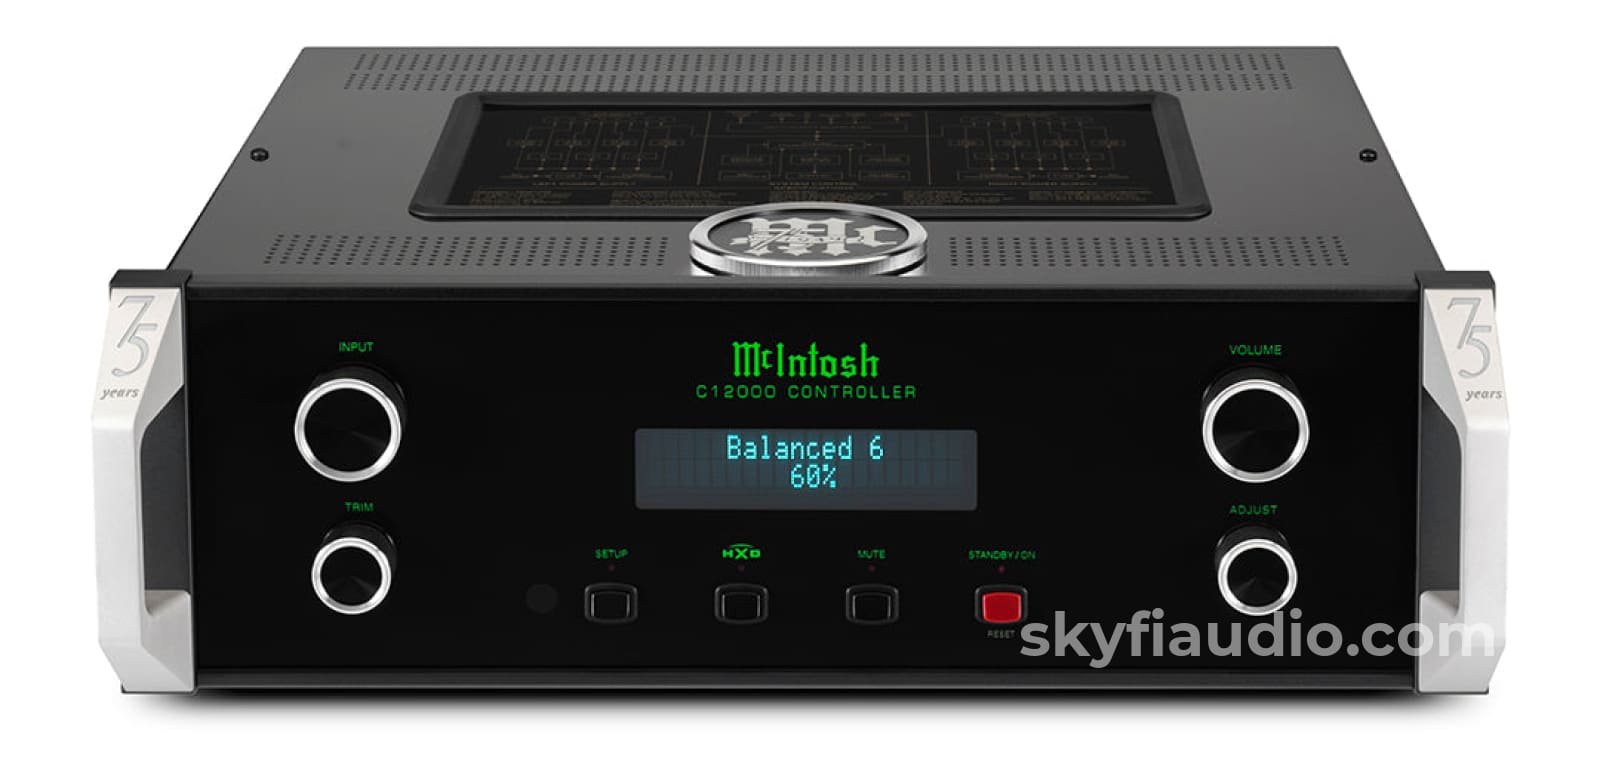 Mcintosh C12000 75Th Anniversary Hybrid Drive All Analog Flagship Preamplifier - New